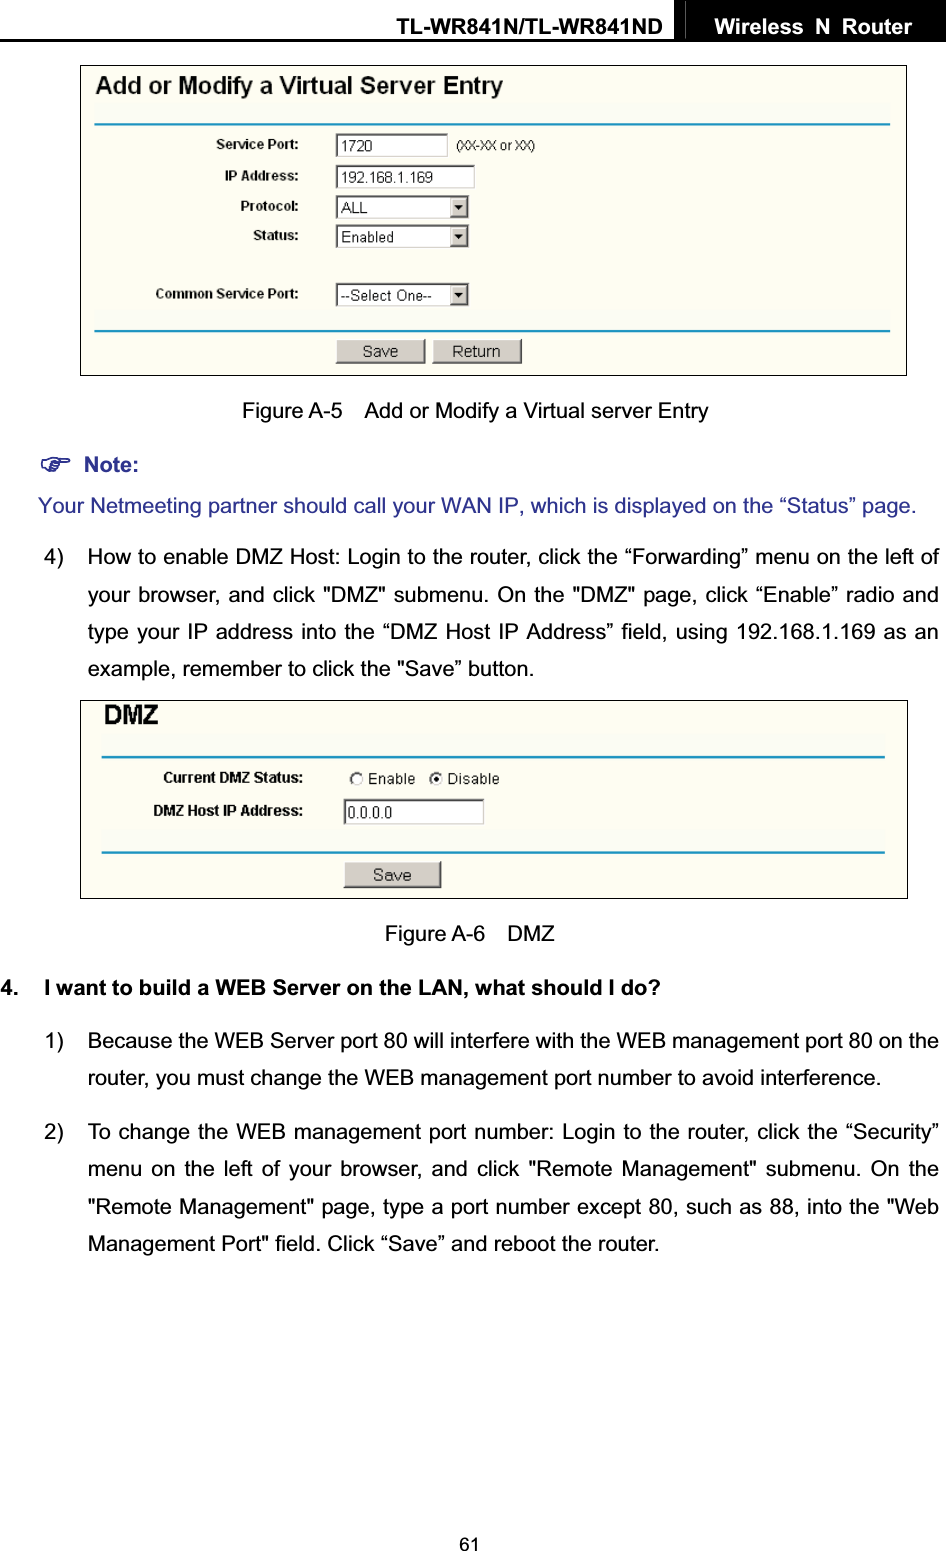 TL-WR841N/TL-WR841ND  Wireless N Router  61  Figure A-5    Add or Modify a Virtual server Entry )Note:Your Netmeeting partner should call your WAN IP, which is displayed on the “Status” page.4)  How to enable DMZ Host: Login to the router, click the “Forwarding” menu on the left of your browser, and click &quot;DMZ&quot; submenu. On the &quot;DMZ&quot; page, click “Enable” radio and type your IP address into the “DMZ Host IP Address” field, using 192.168.1.169 as an example, remember to click the &quot;Save” button.   Figure A-6  DMZ 4.  I want to build a WEB Server on the LAN, what should I do? 1)  Because the WEB Server port 80 will interfere with the WEB management port 80 on the router, you must change the WEB management port number to avoid interference. 2)  To change the WEB management port number: Login to the router, click the “Security” menu on the left of your browser, and click &quot;Remote Management&quot; submenu. On the &quot;Remote Management&quot; page, type a port number except 80, such as 88, into the &quot;Web Management Port&quot; field. Click “Save” and reboot the router. 